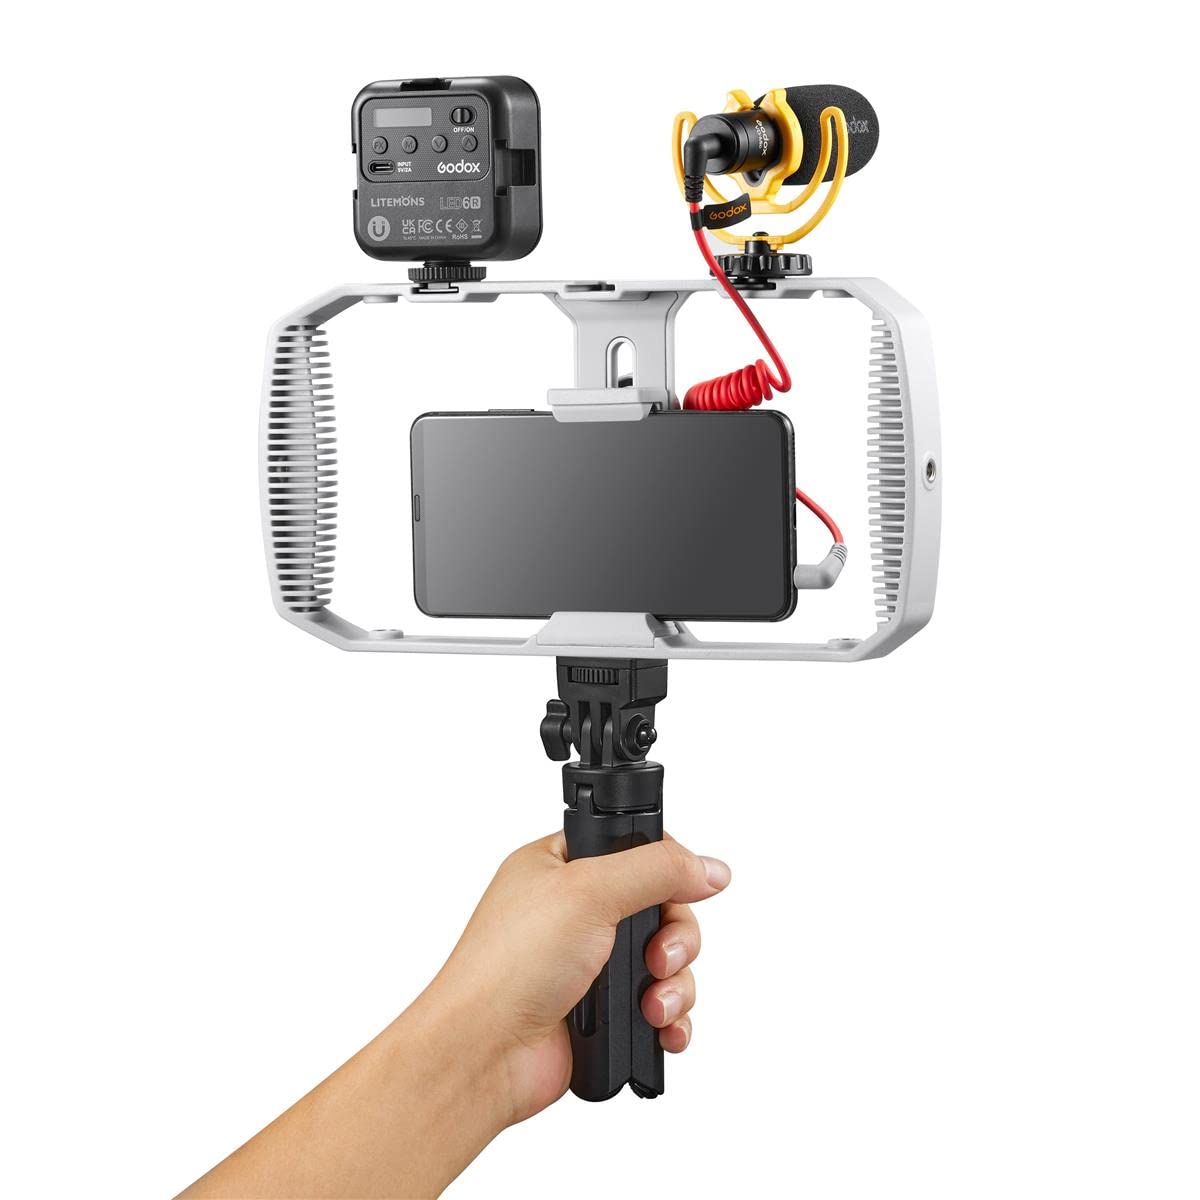 GODOX VK1-UC Vlogging Kit for Mobile Devices with USB Type-C Ports